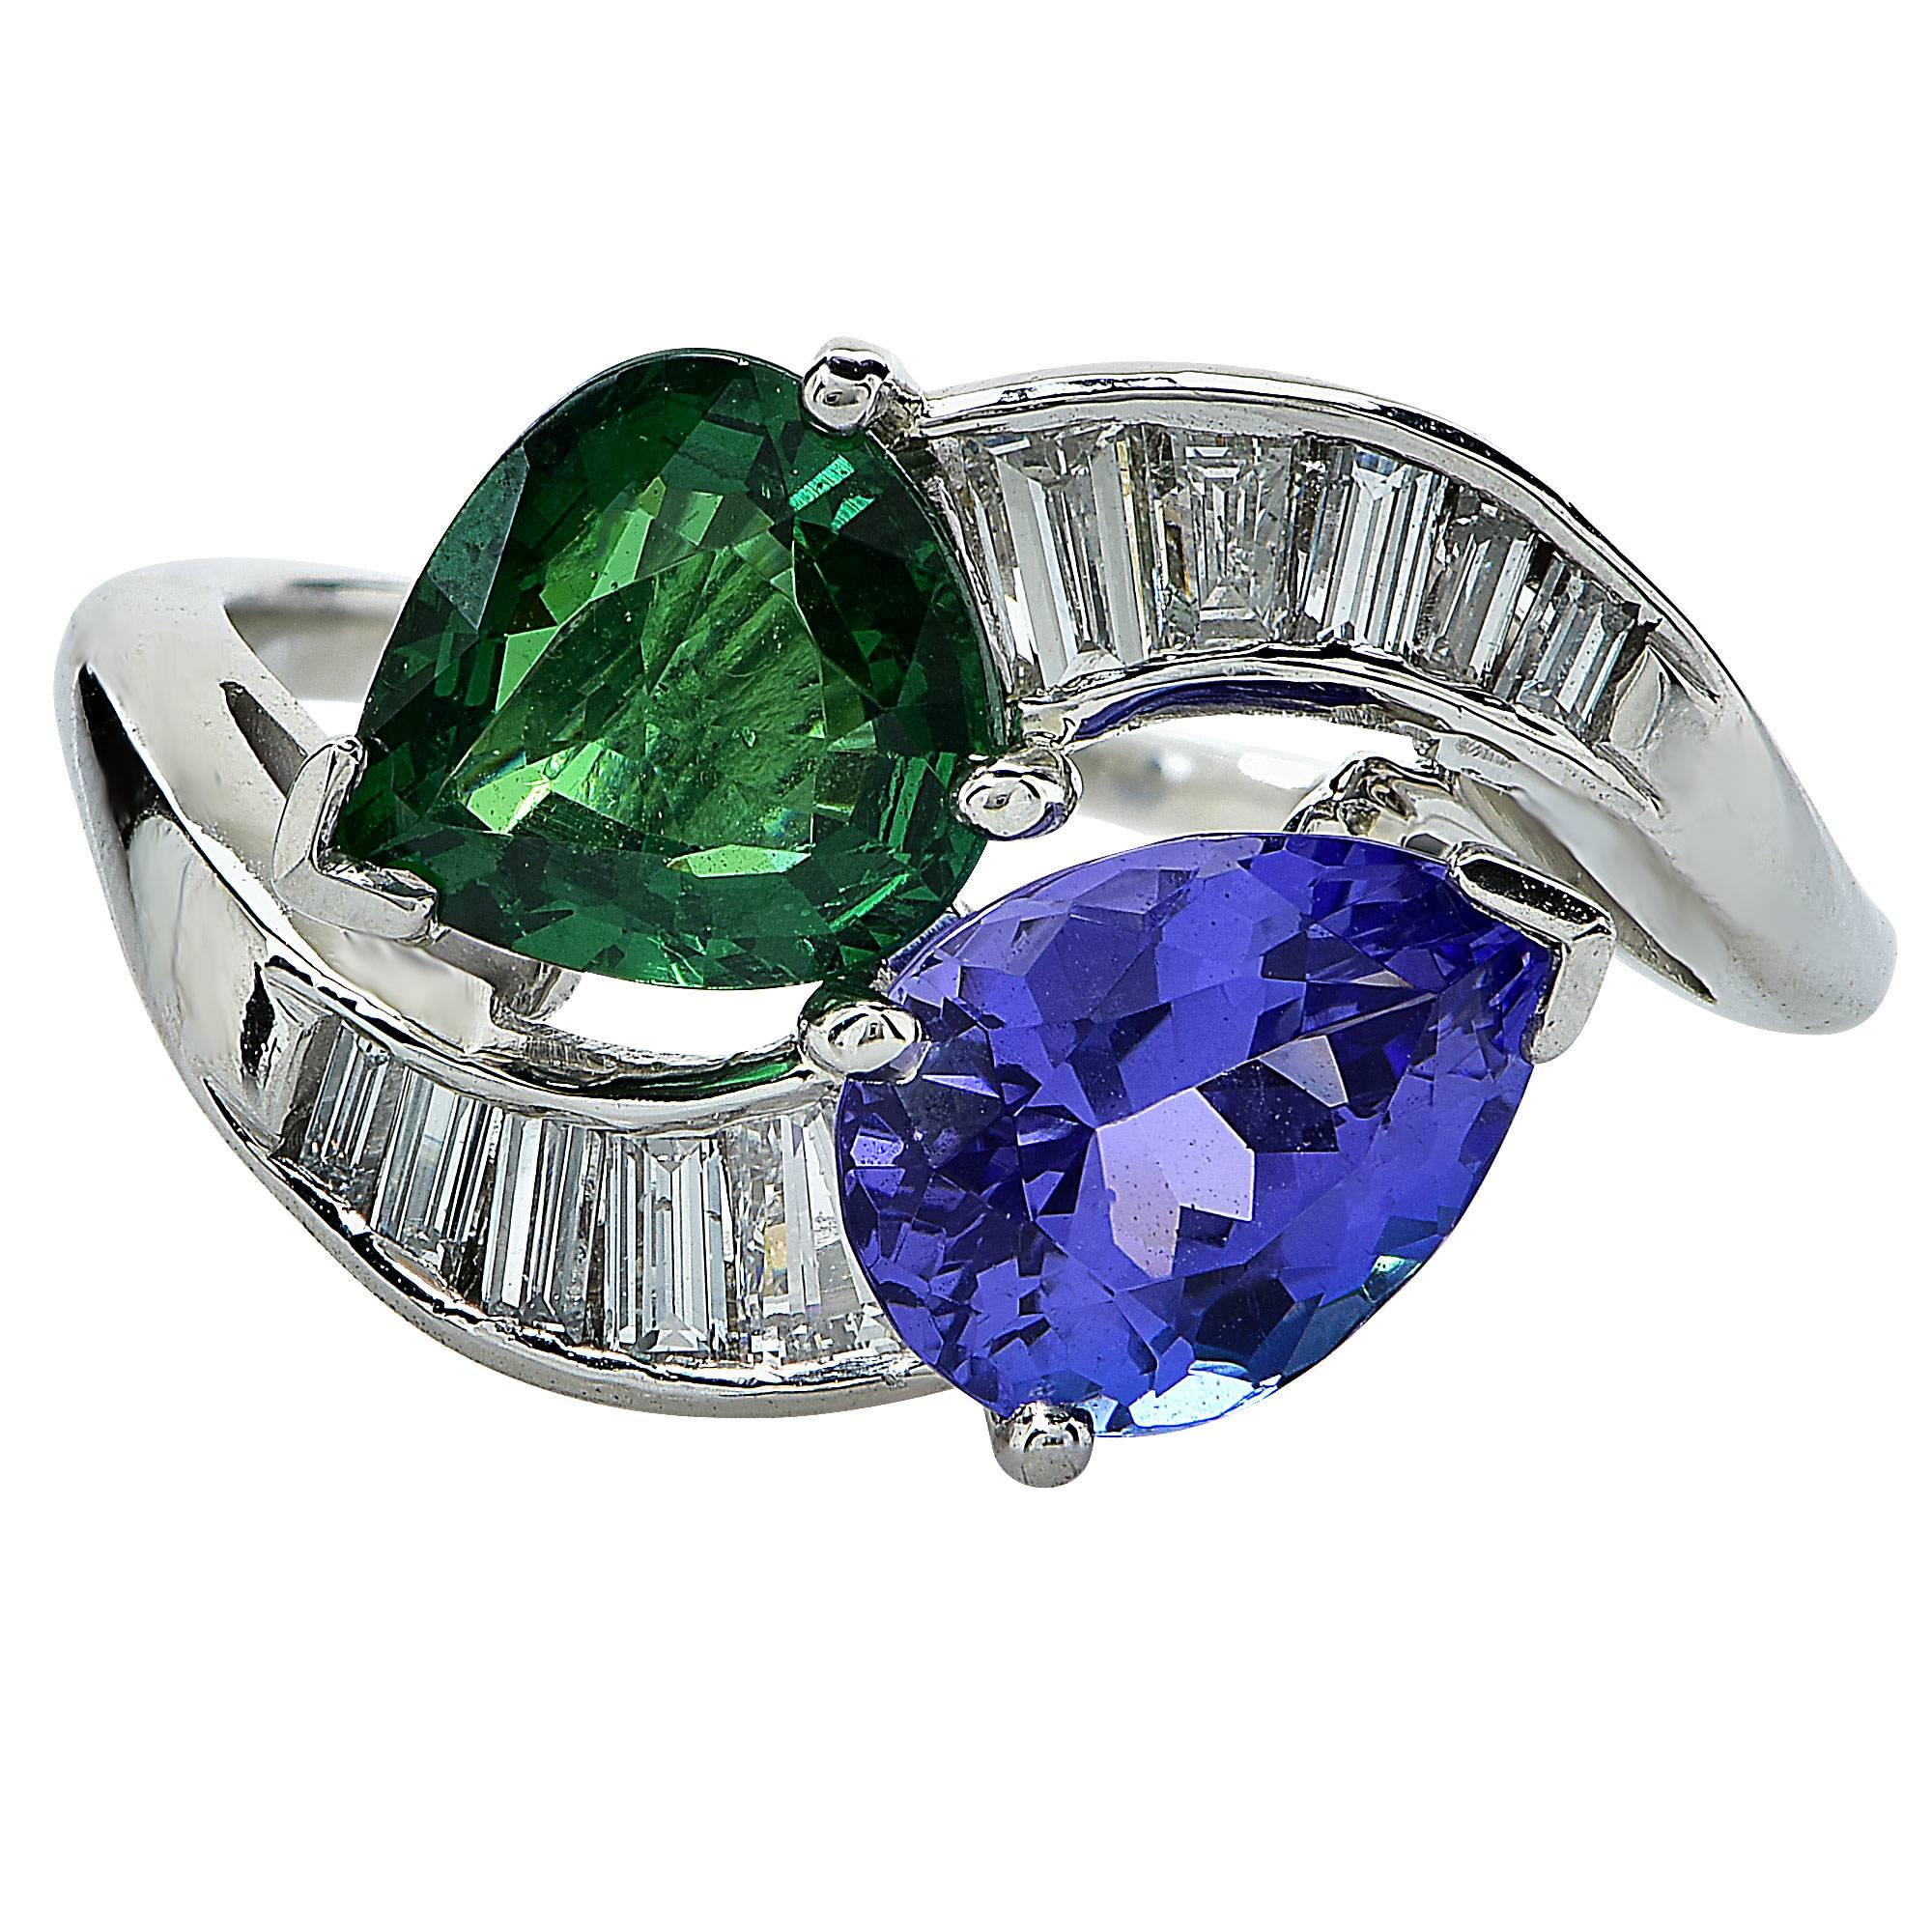 Platinum ring featuring a pear shape Tanzanite weighing 1.93cts , flanked by a pear shape Tsavorite garnet weighing 1.70cts total, accented by approximately .60cts total of baguette cut diamonds, G color, VS clarity.

Ring size: 6 (can be sized up